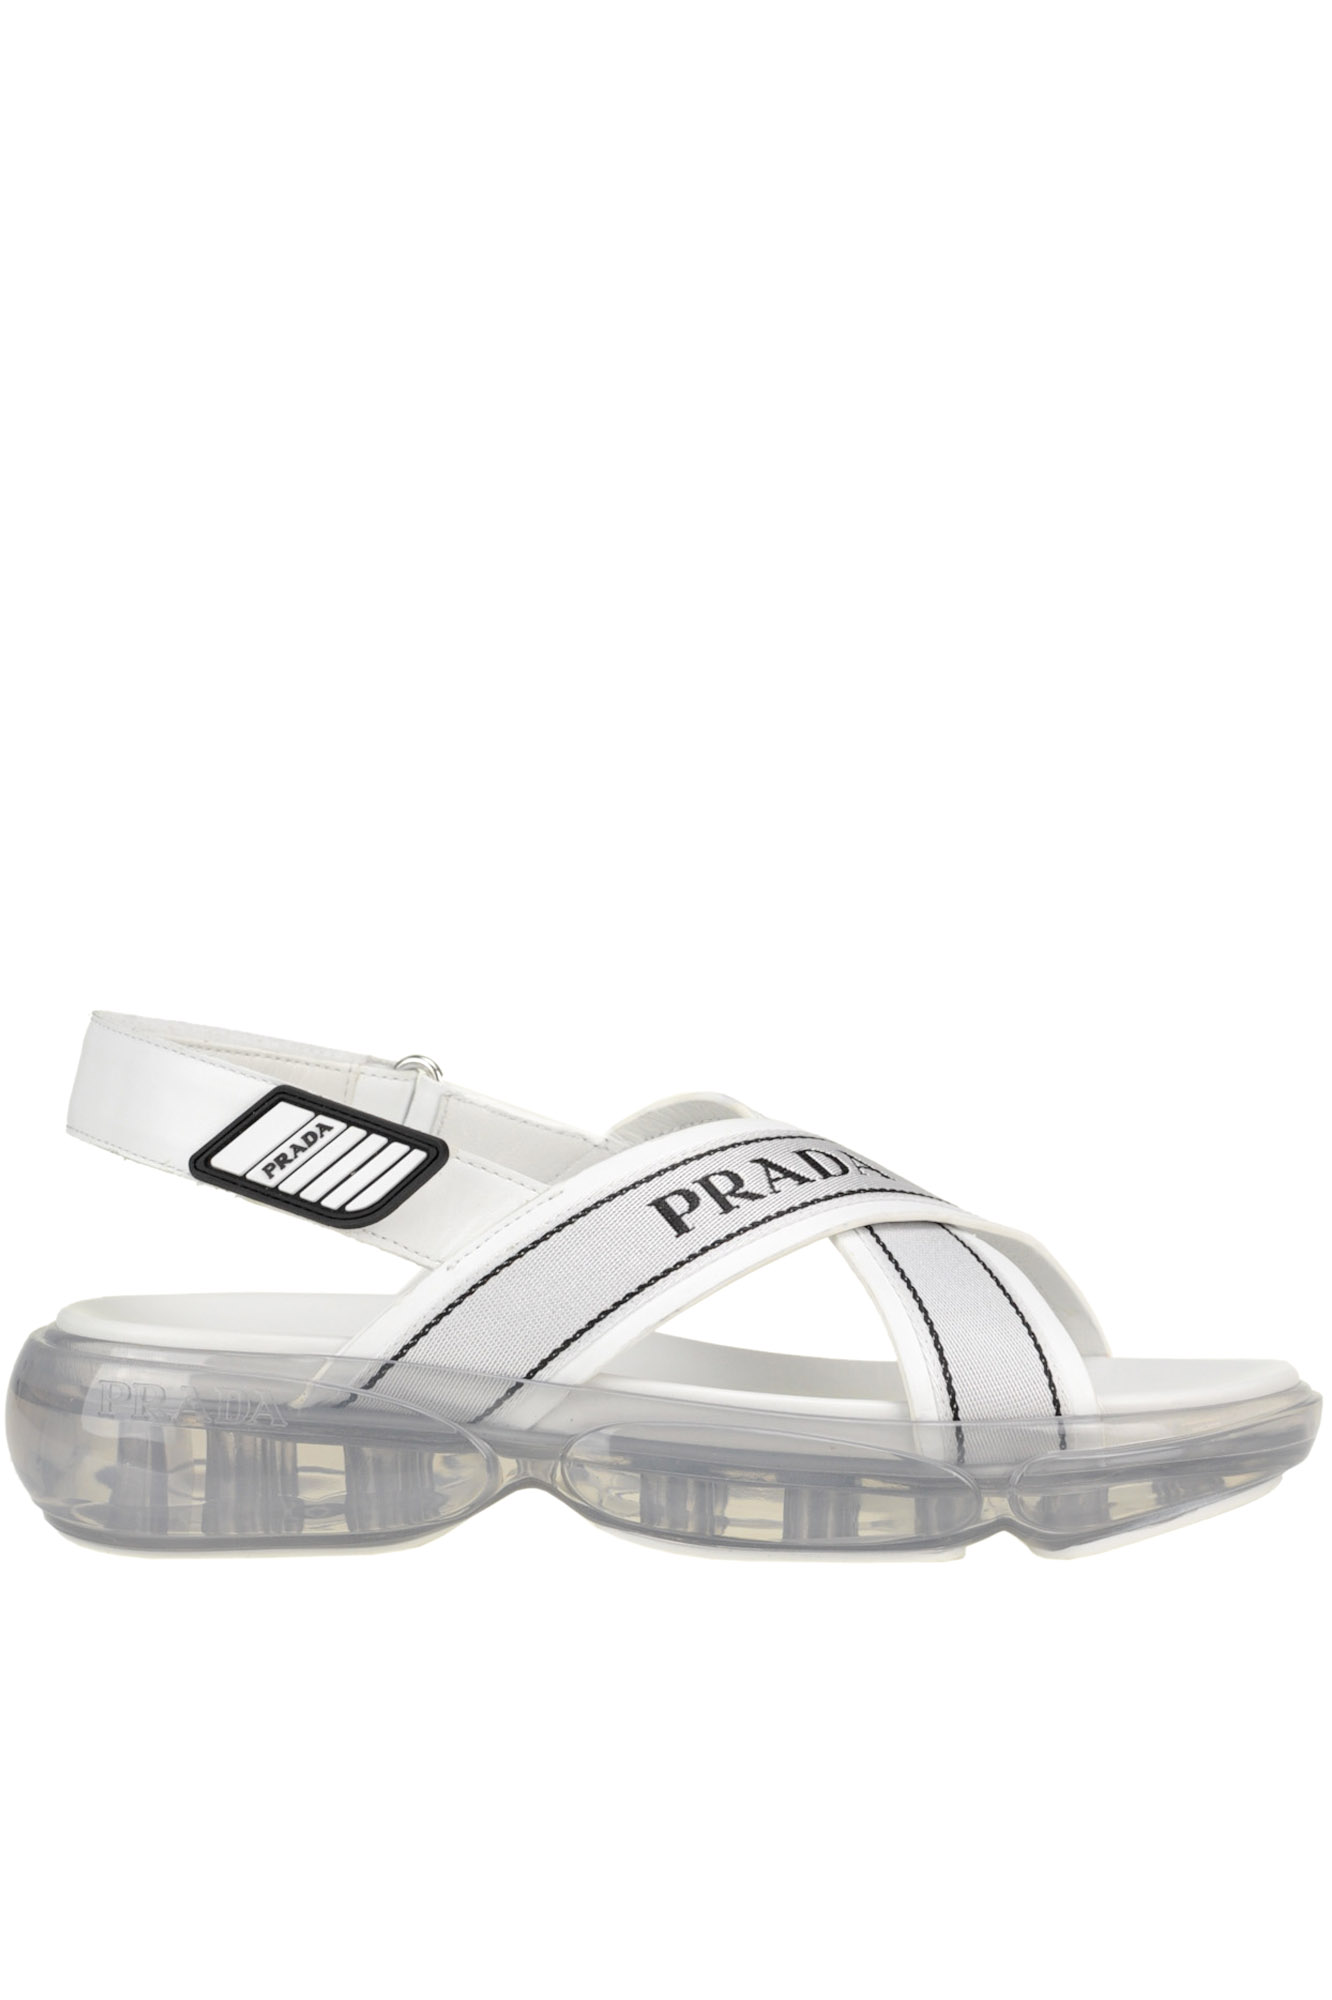 Prada Leather And Canvas Sandals In White